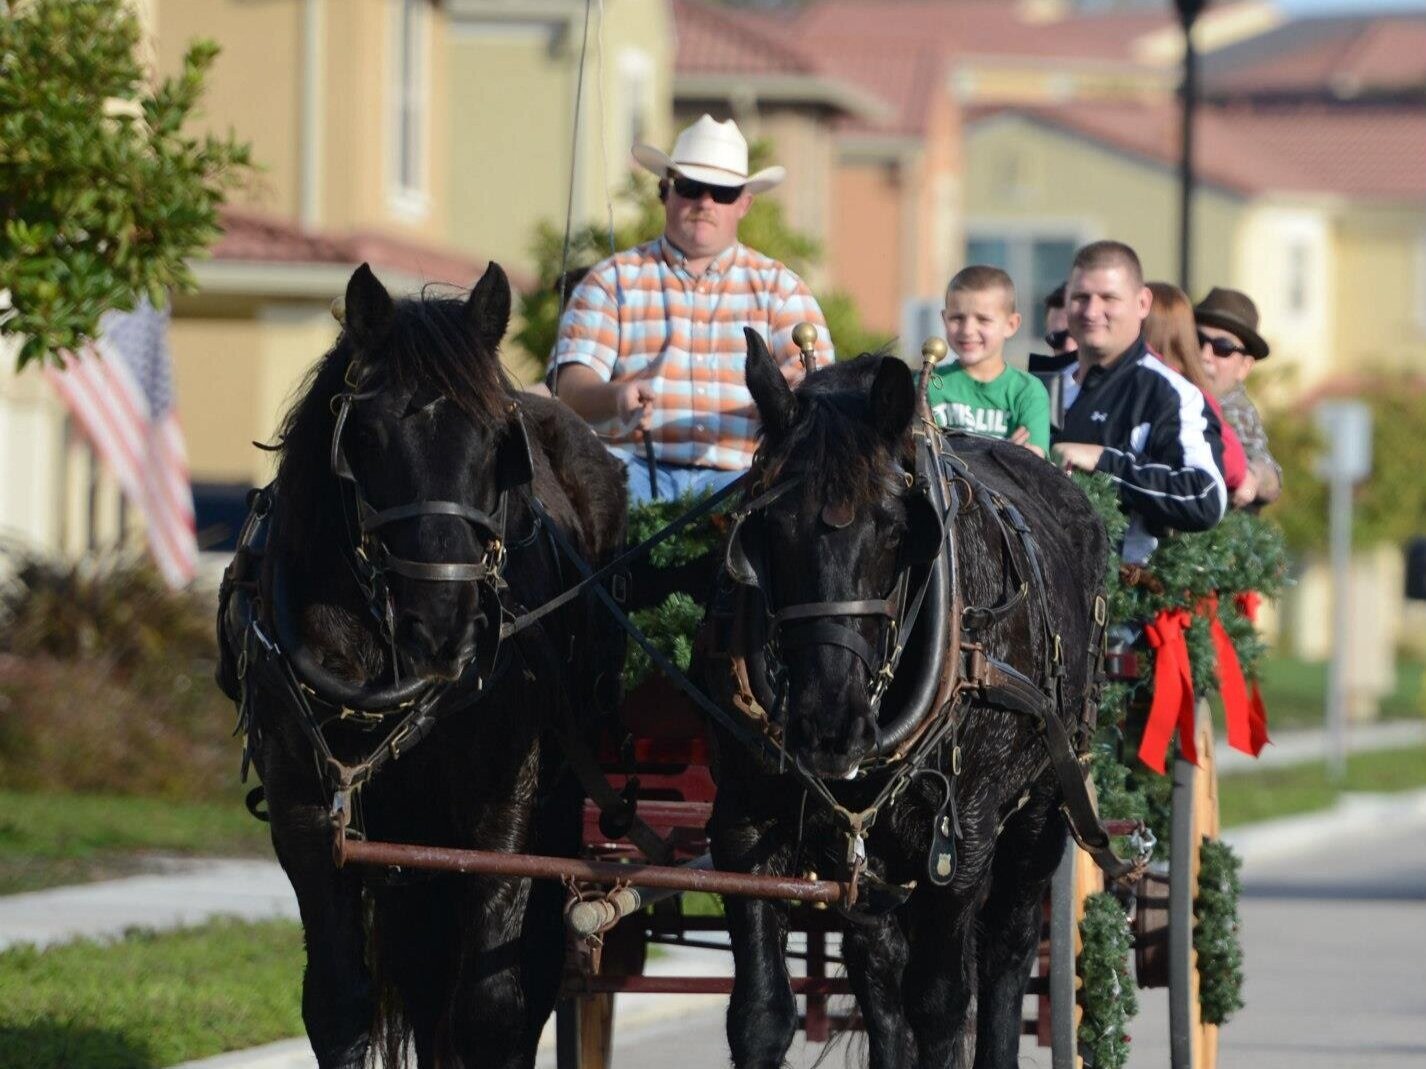 Residents cruise throughout our neighborhoods on horse and buggy!